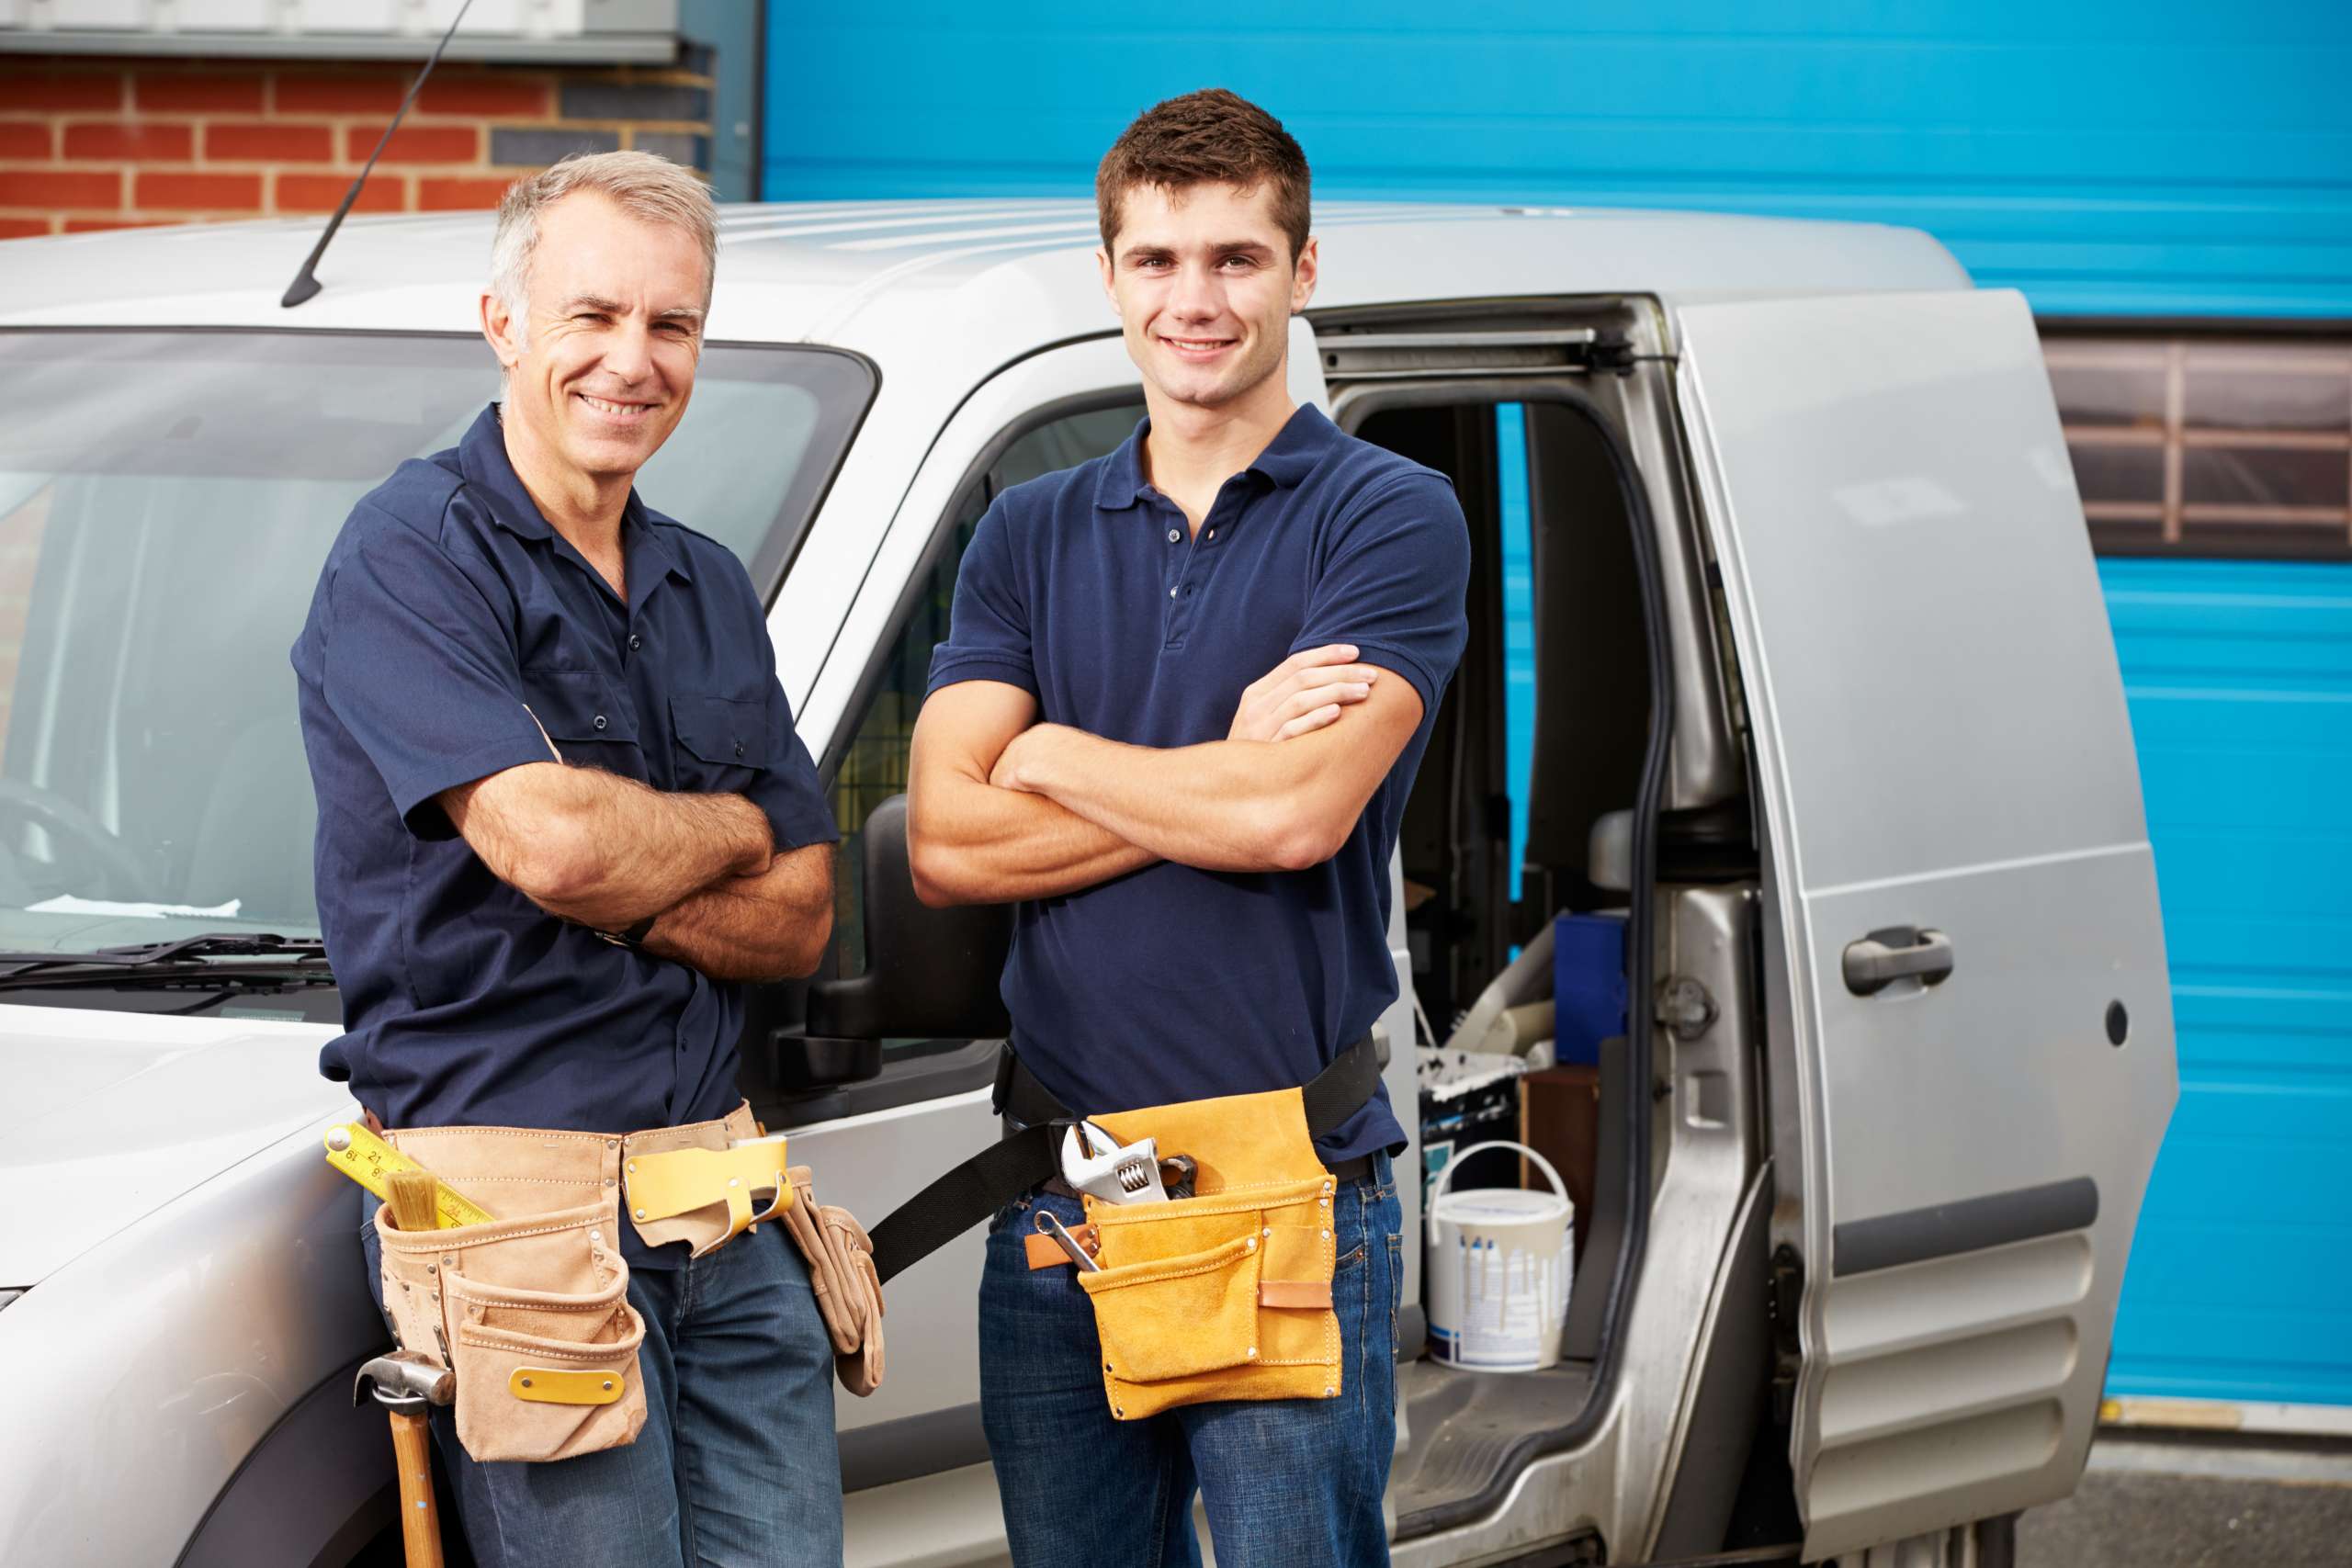 Two plumbers and construction workers with vehicle